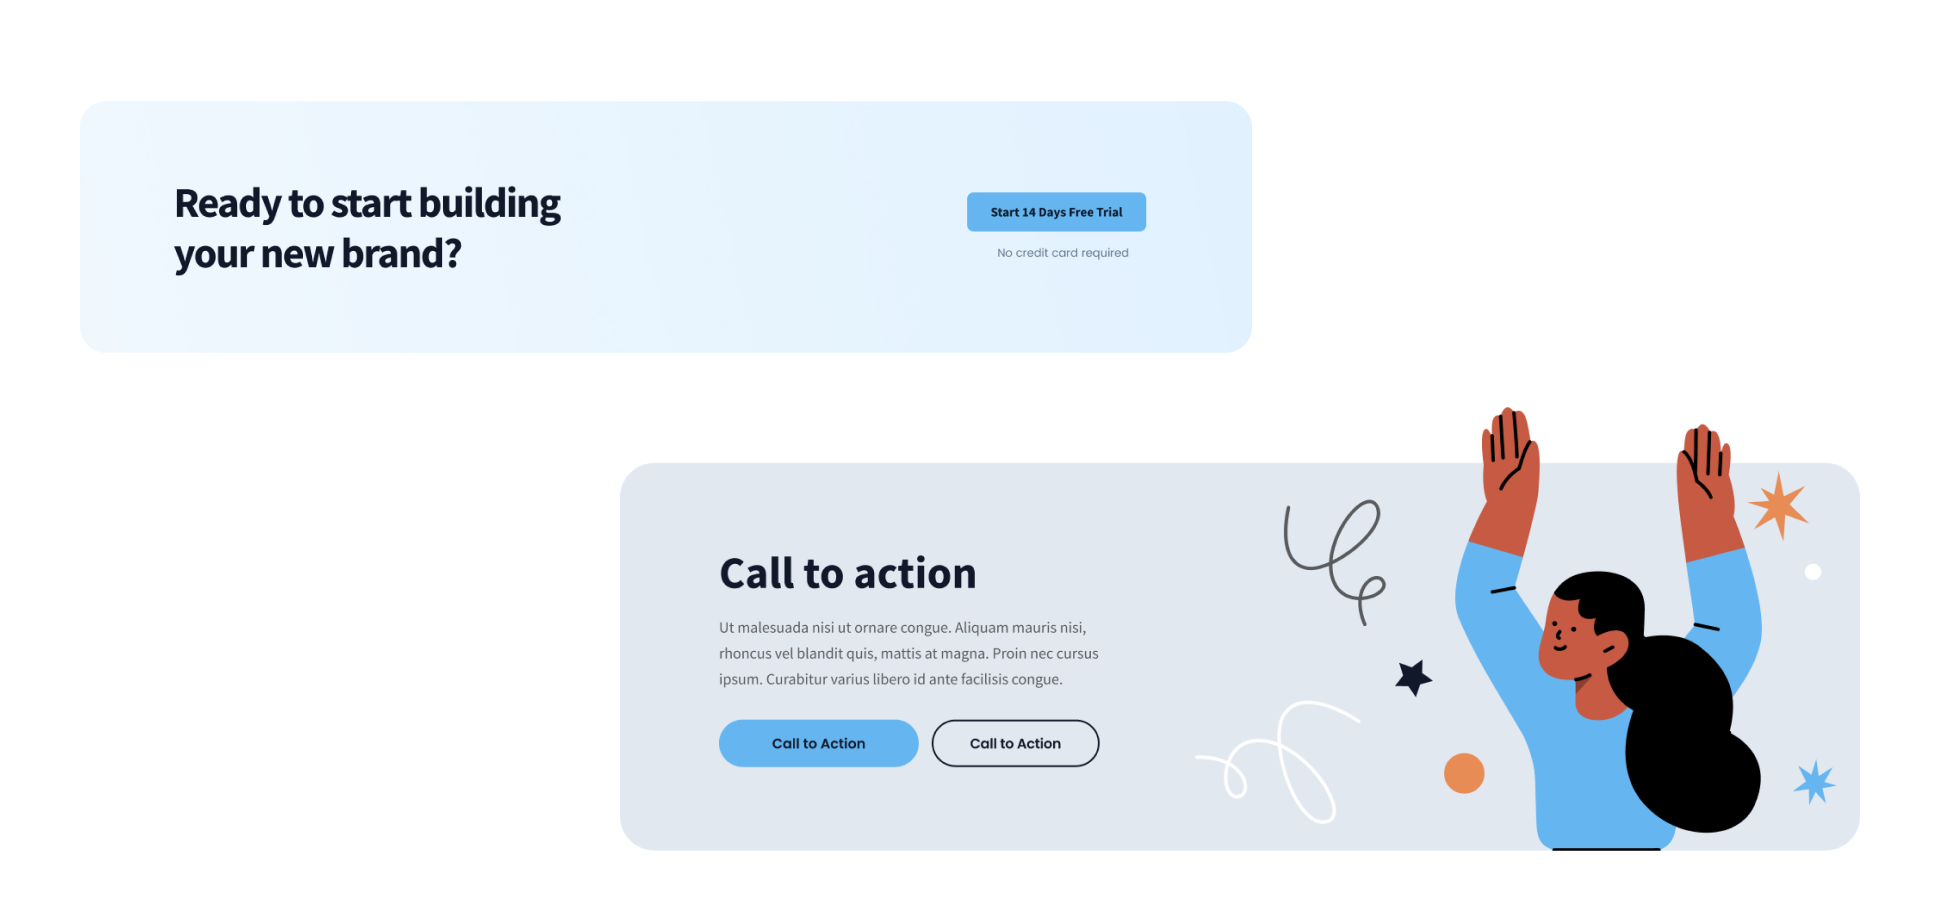 Two good examples of Call to Actions